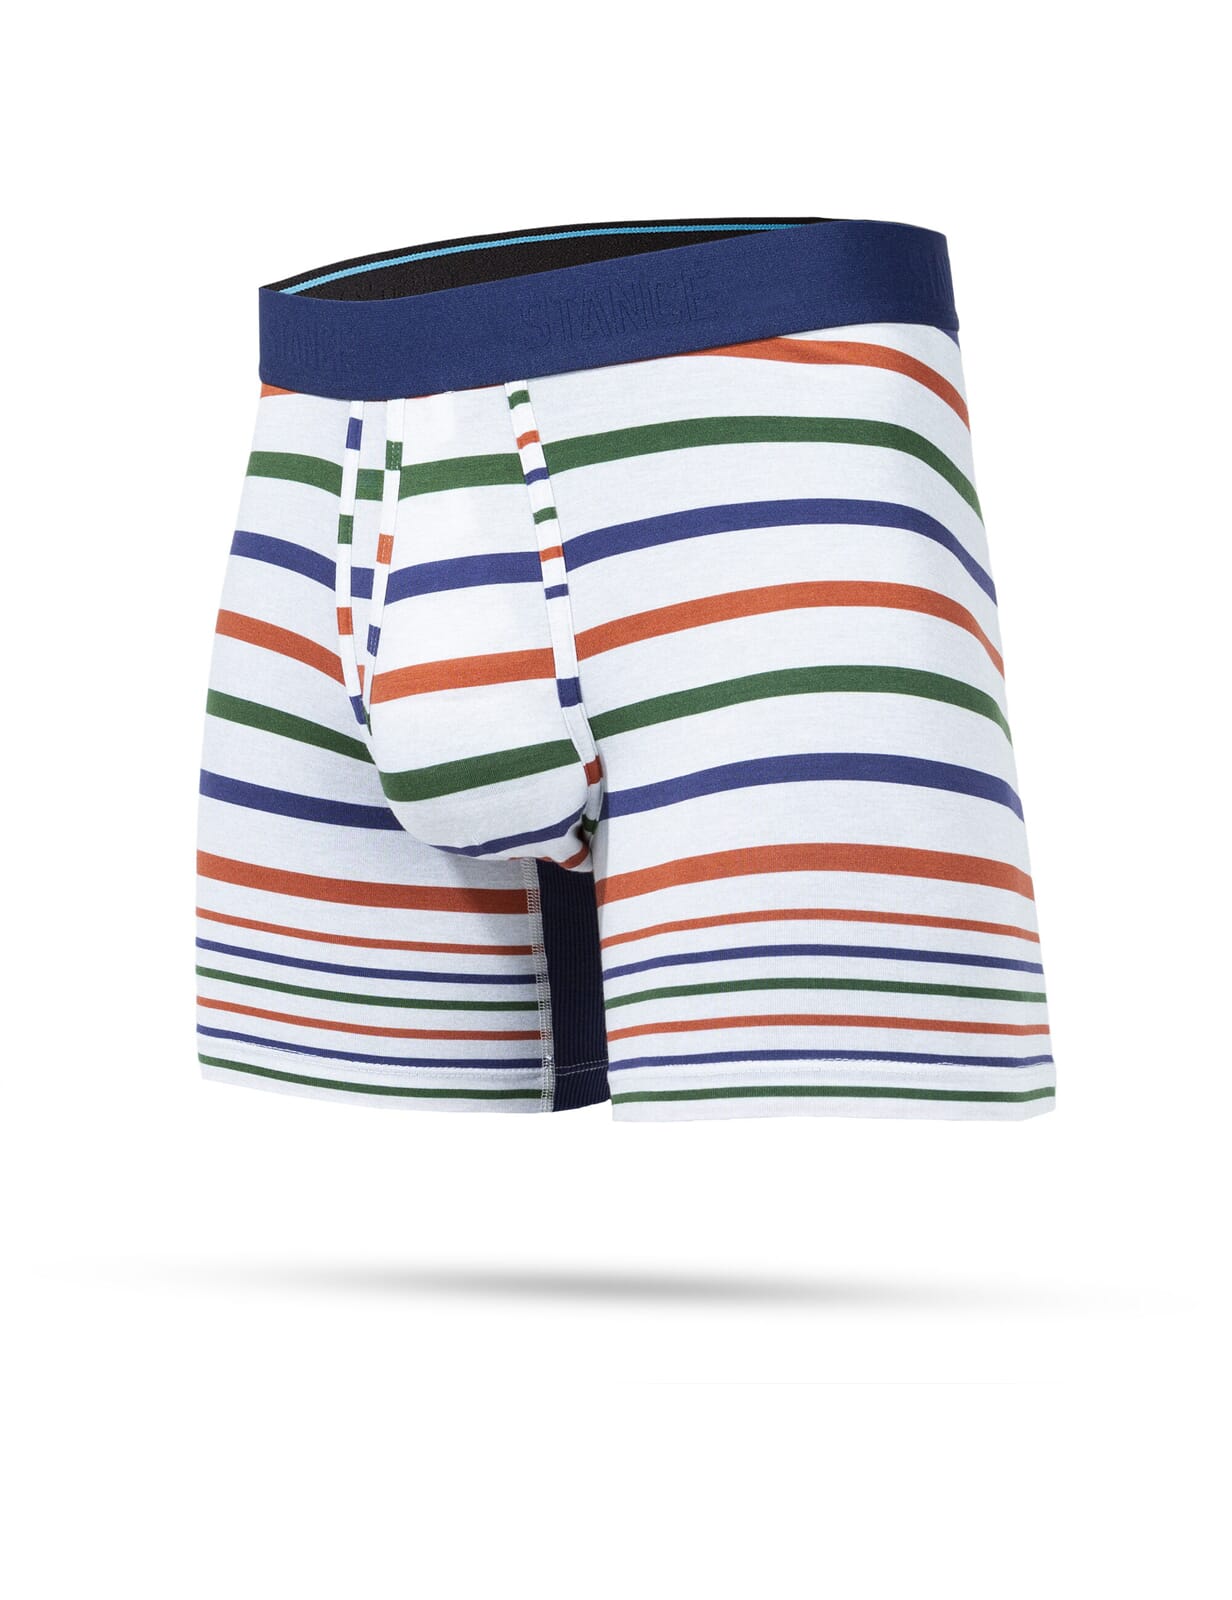 Stance Forget Me Not Wholester Boxers in Navy